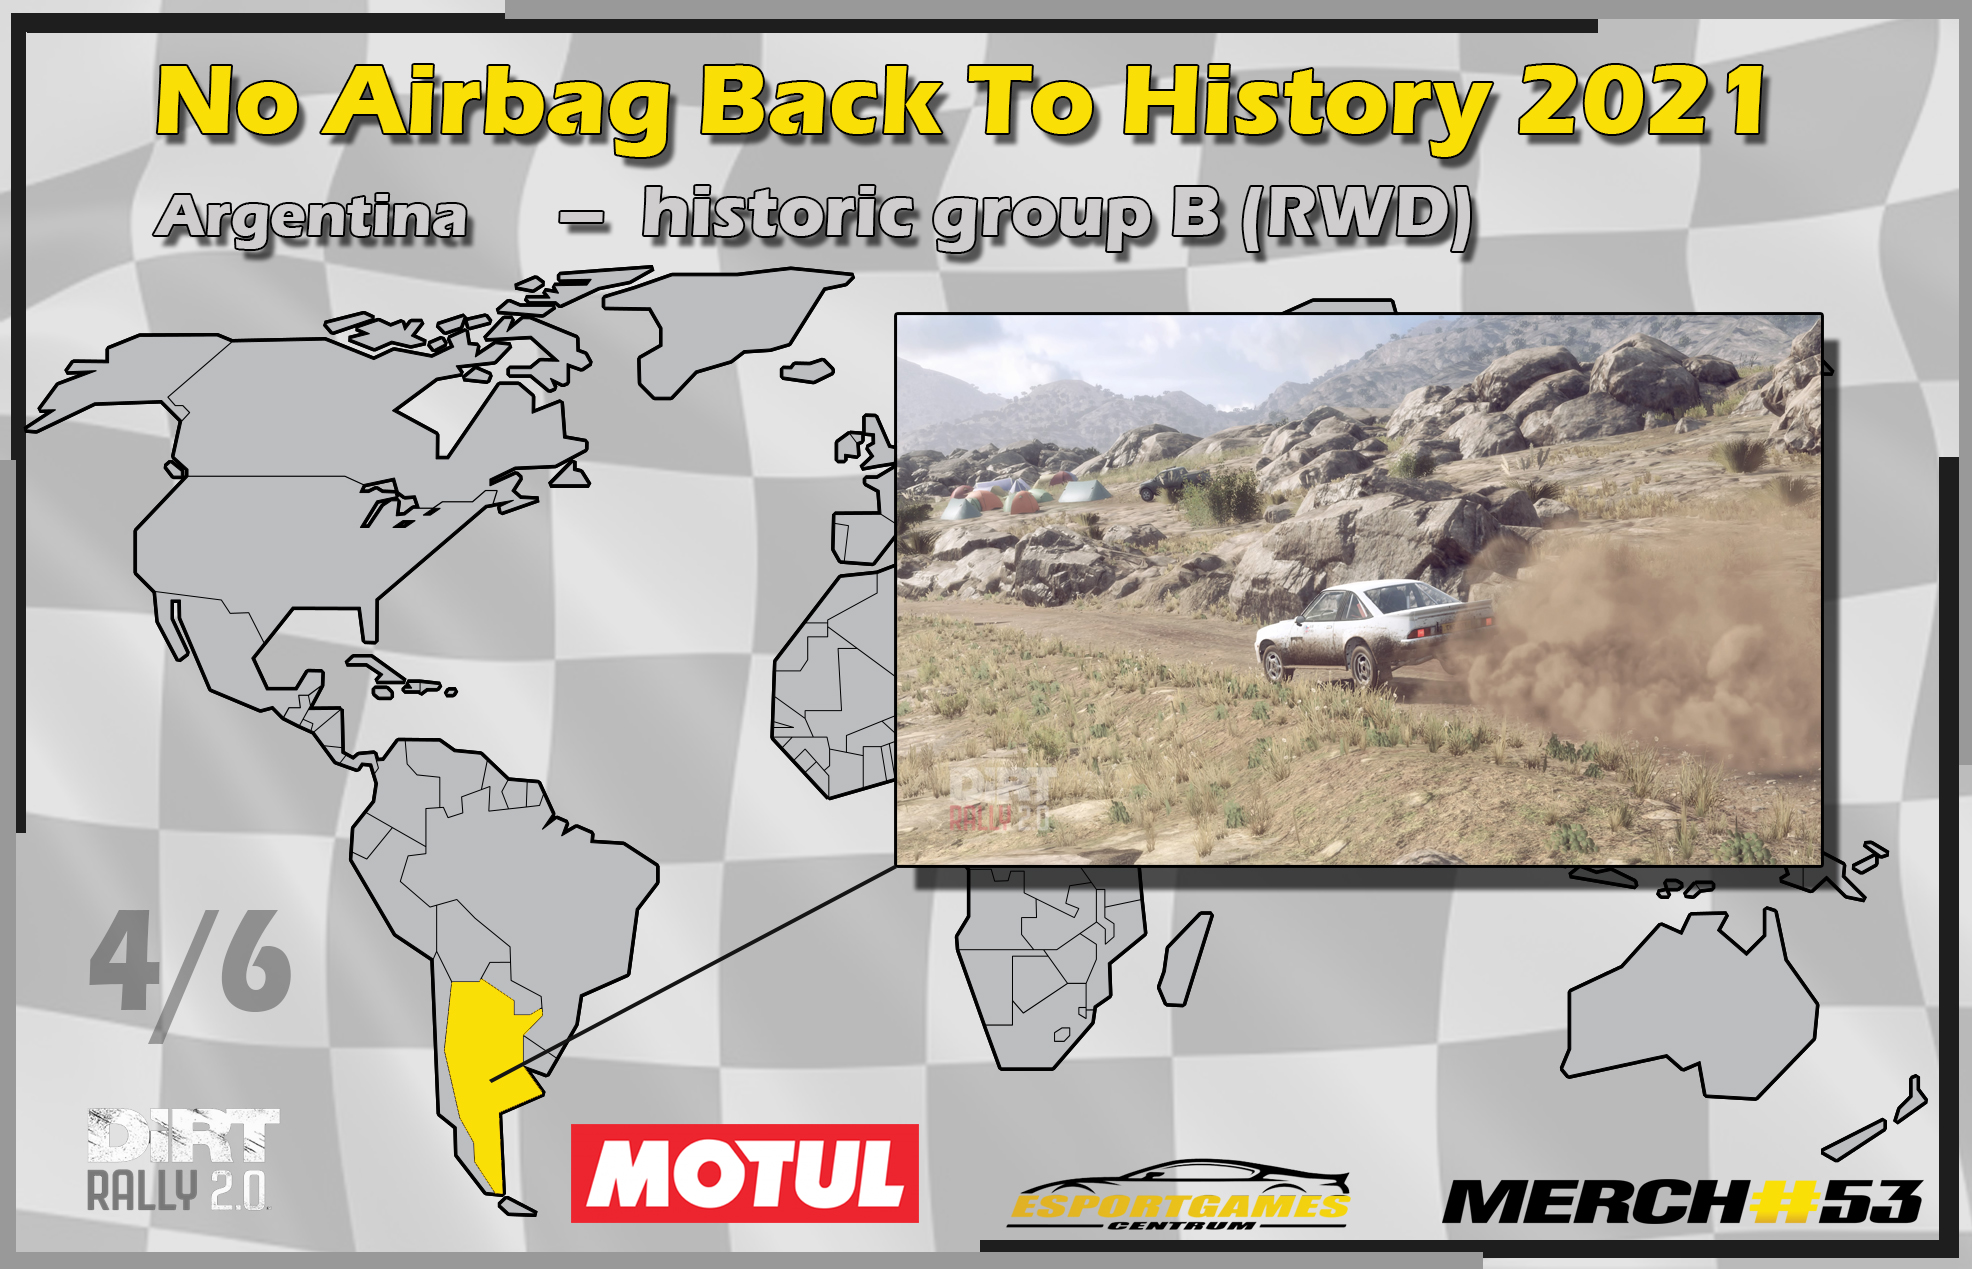 04. No Airbag Back To History 2021 - Argentina